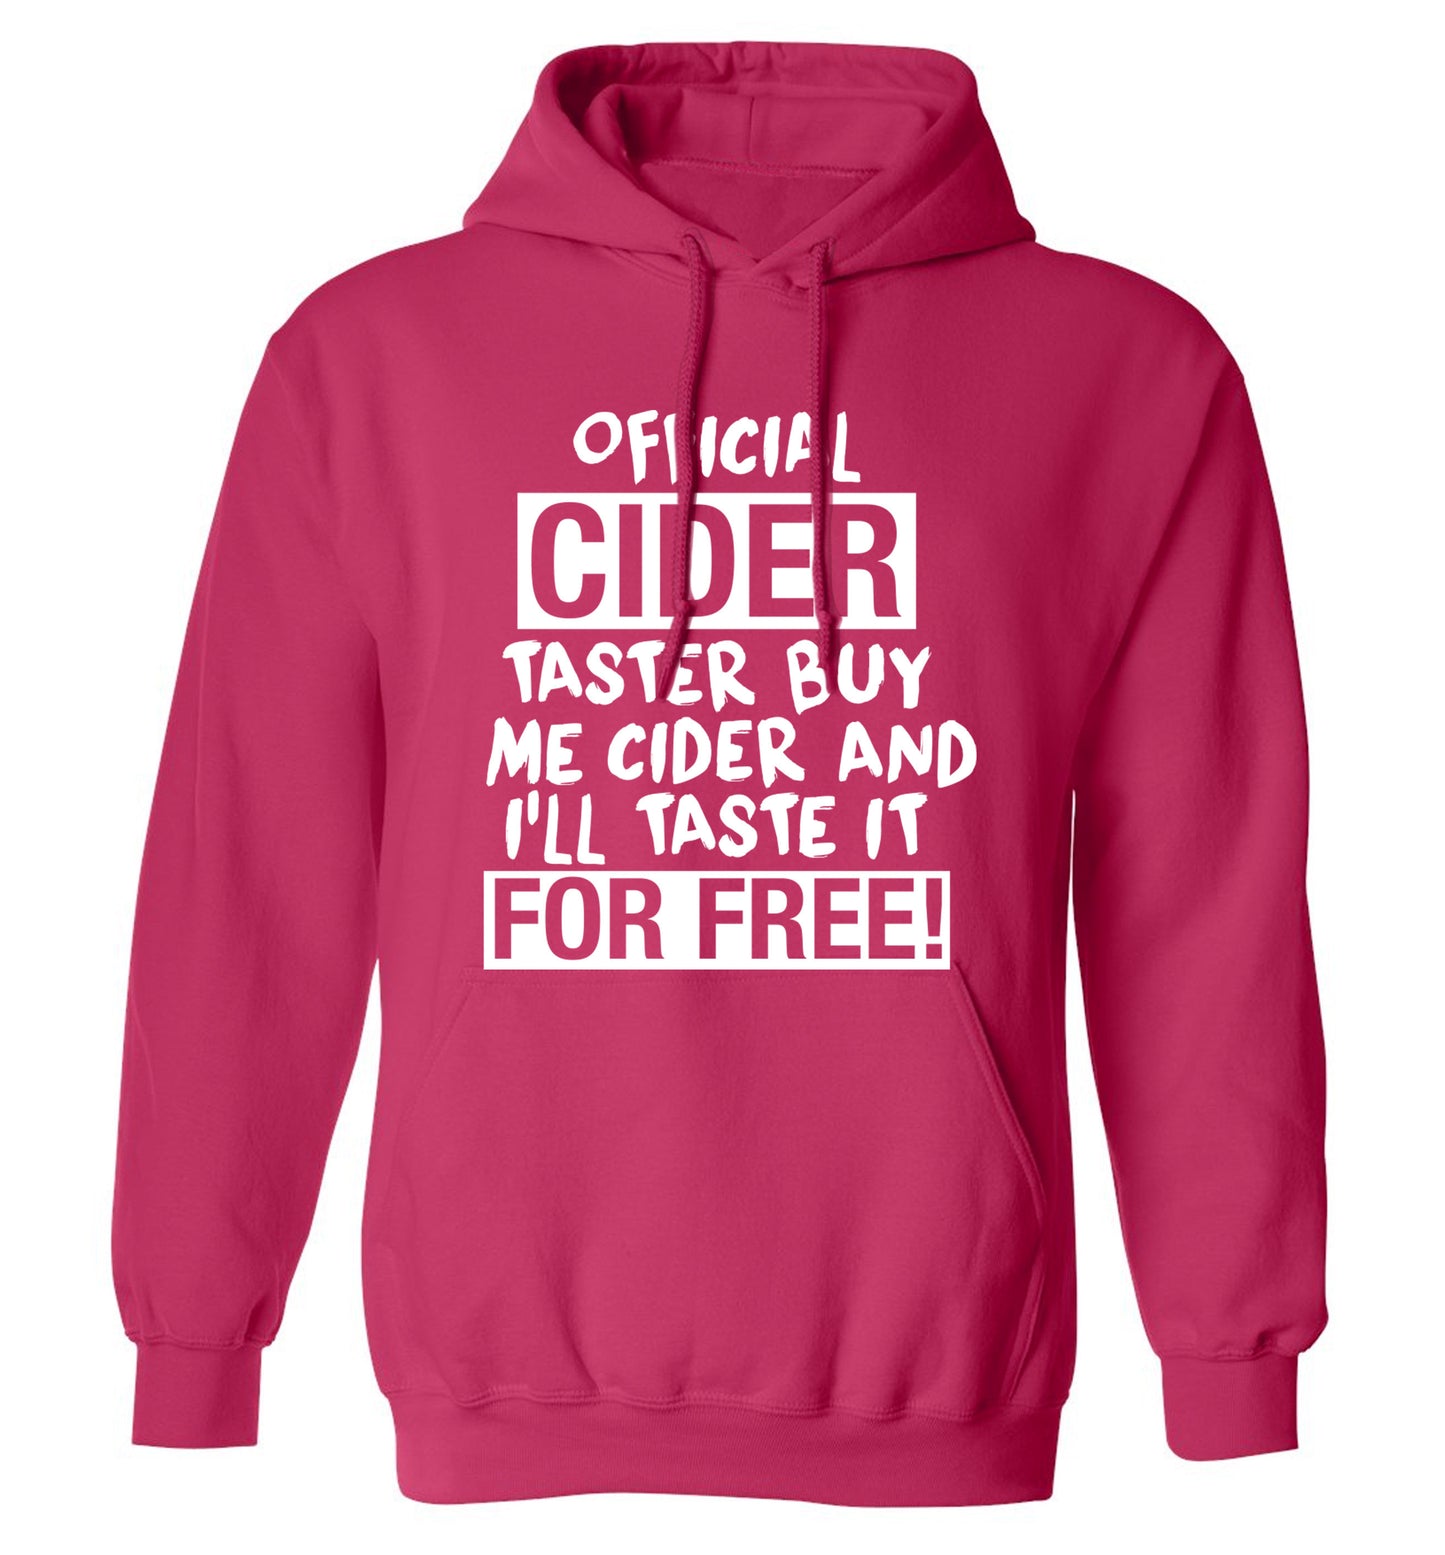 Official cider taster buy me cider and I'll taste it for free! adults unisex pink hoodie 2XL